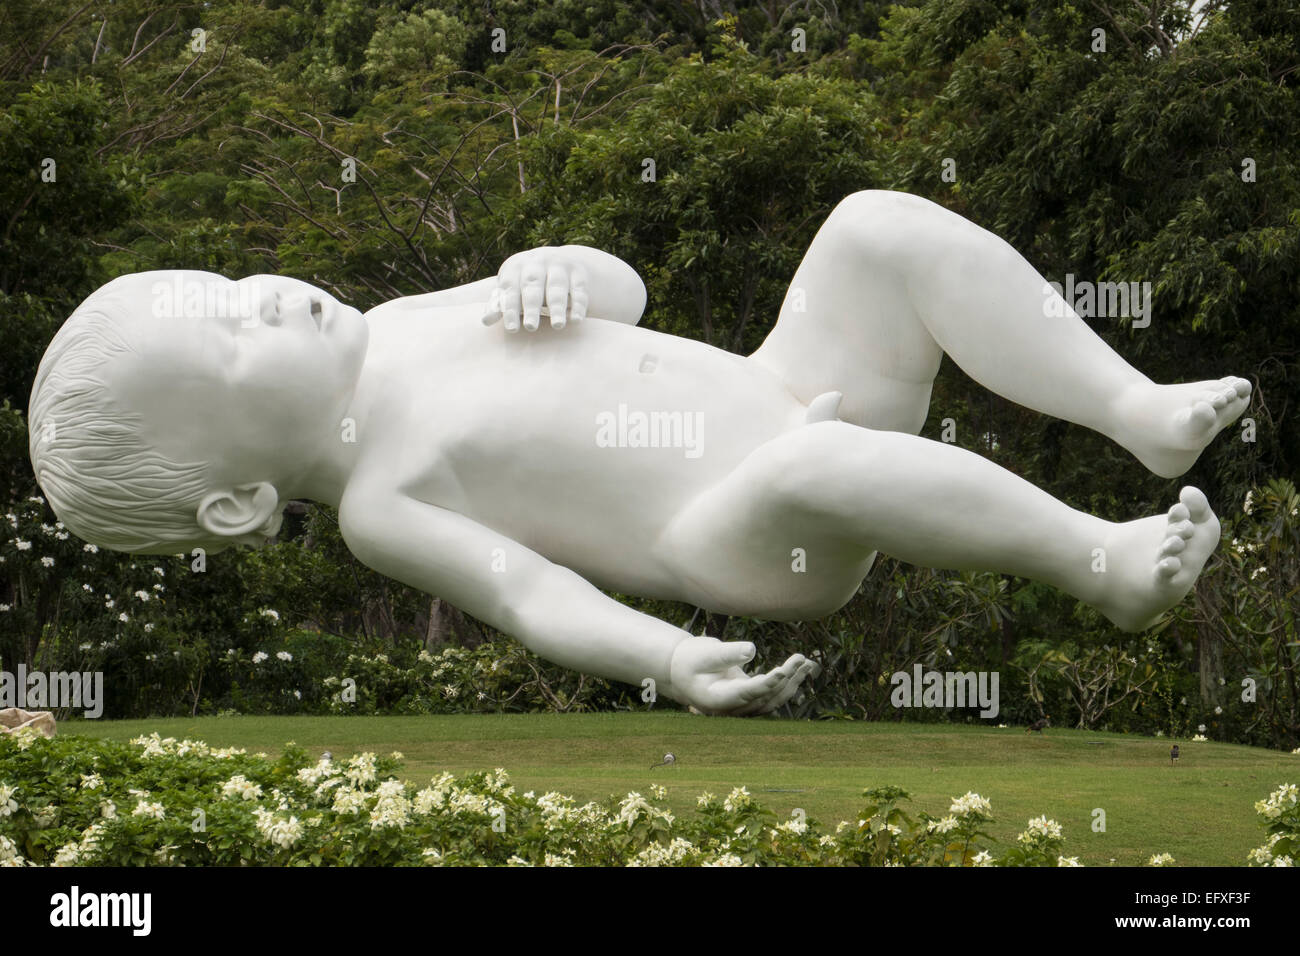 Singapore, Gardens by the Bay, 'Planet' sculpture of sleeping boy Stock Photo